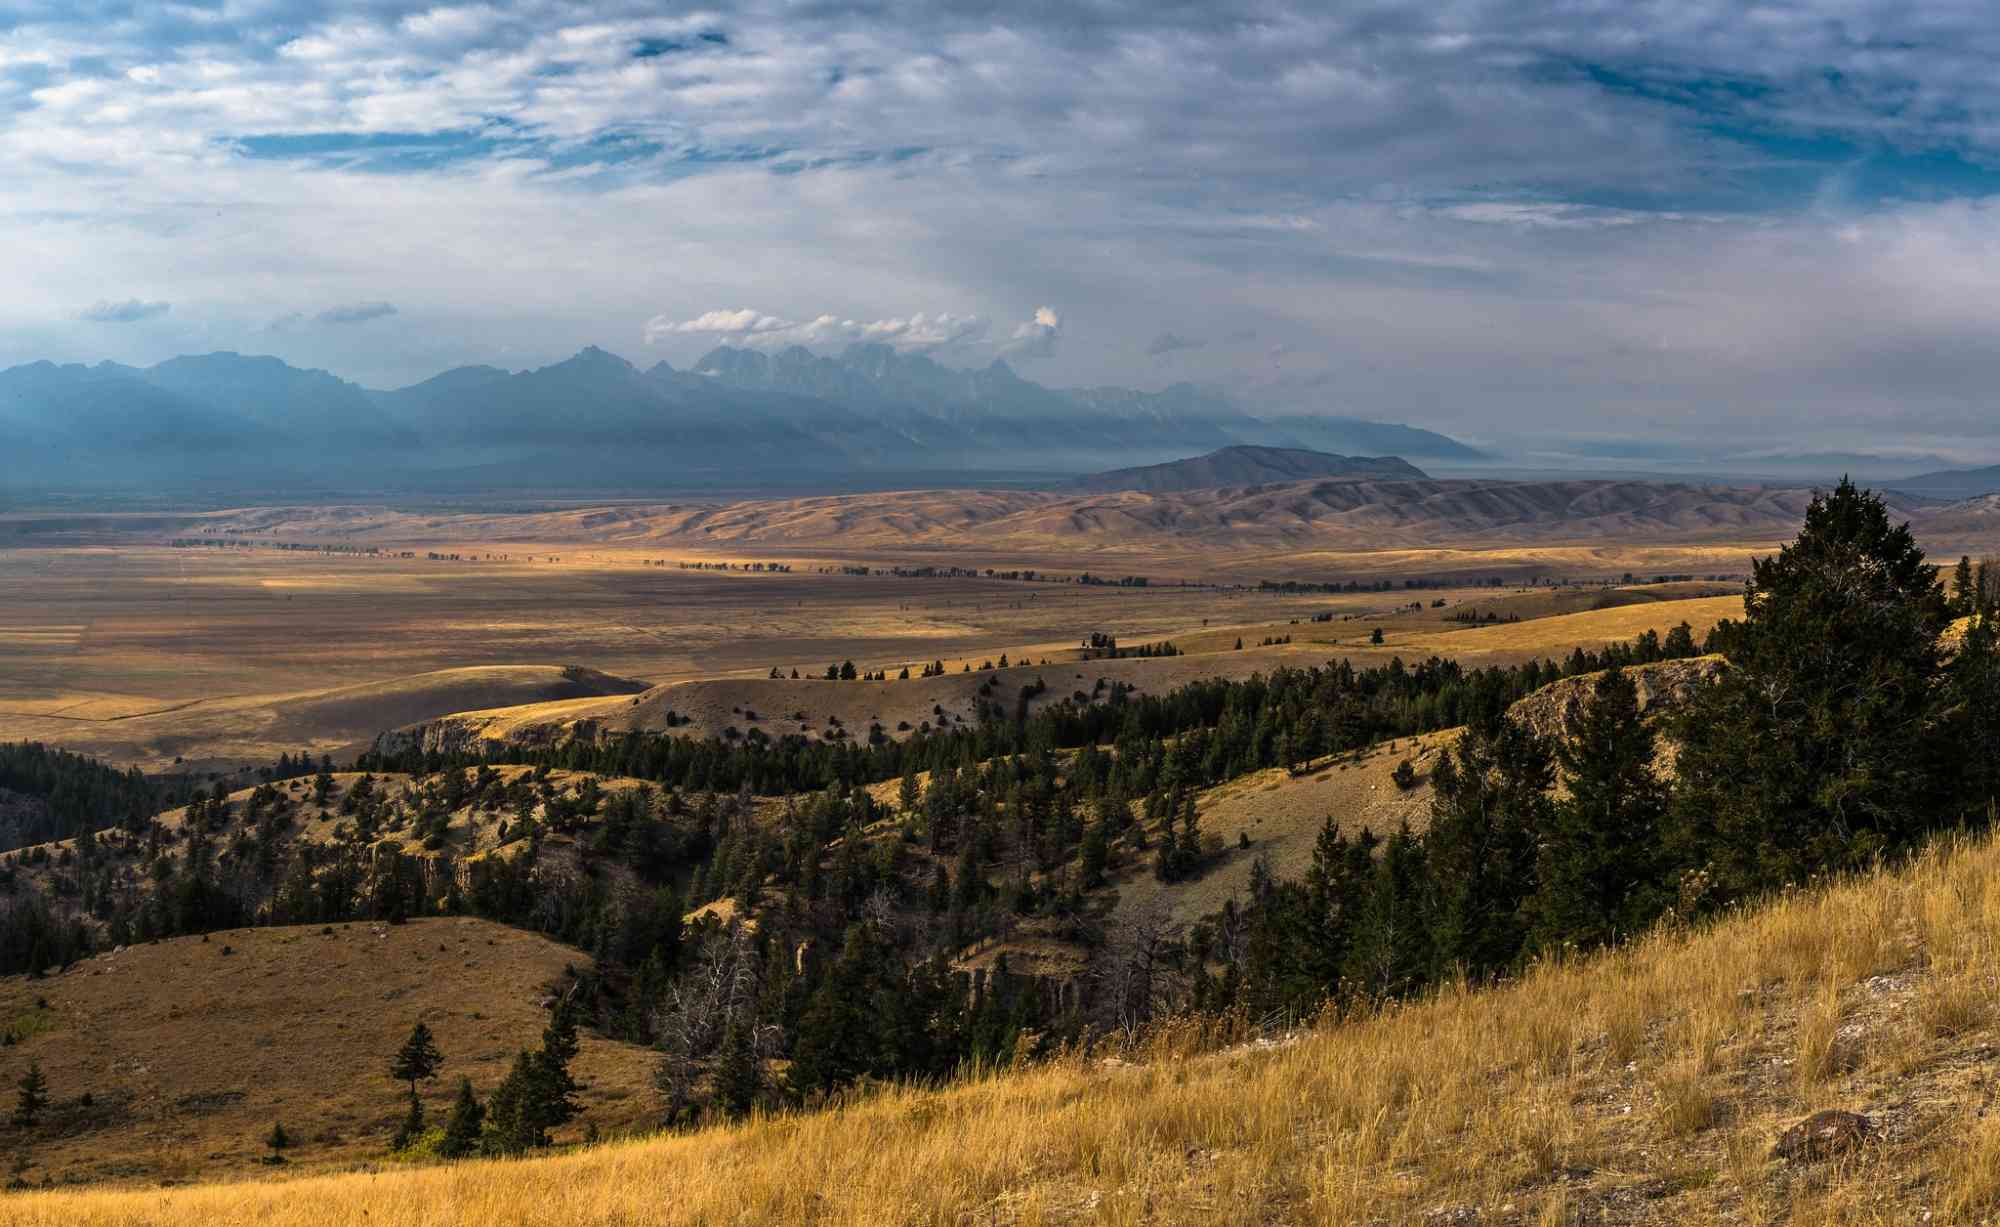 The Teton Range, partially obscured by smoke from the Berry Fire, rises beyond the Jackson Hole valley.